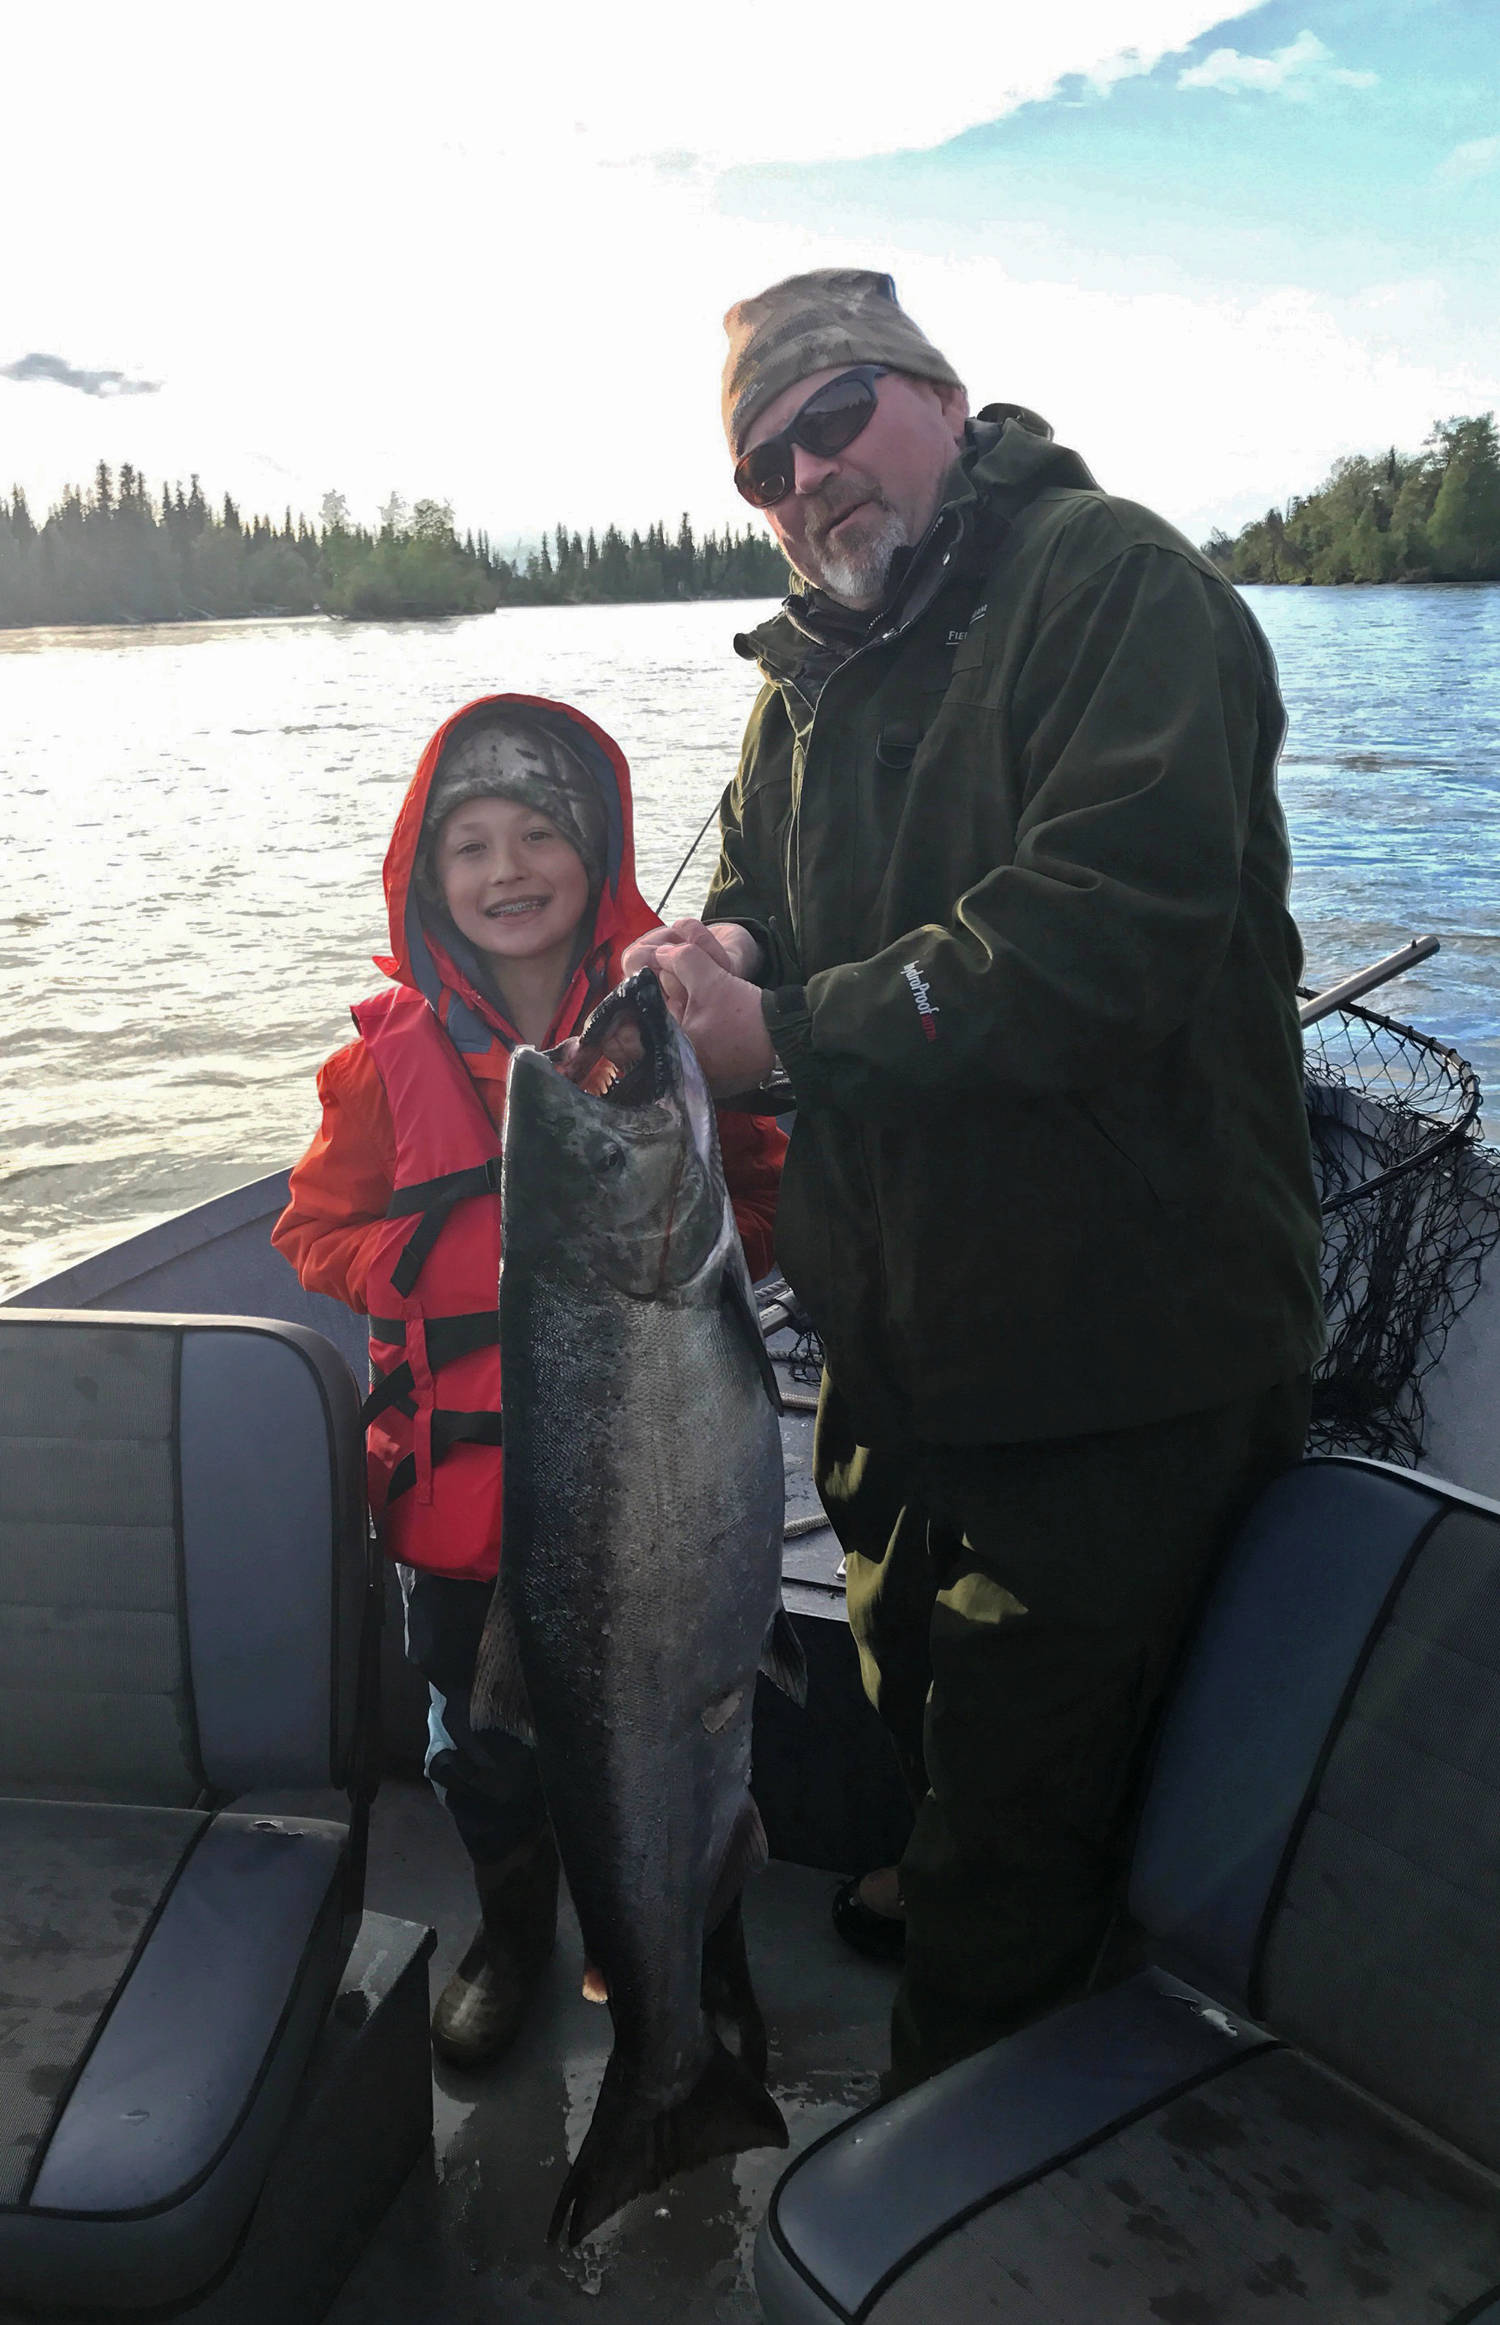 Randy McPherson and his grandson Ethan, 9, both of Wisconsin, show off their Kenai River king salmon caught Tuesday, June 13, 2017. Kenai River early-run kings have been returning in larger numbers this year as compared to the last several years, leading the Alaska Department of Fish and Game to liberalize the maximum size limit for retention from 36 inches to 46 inches on Monday. (Photo courtesy Jason Foster)